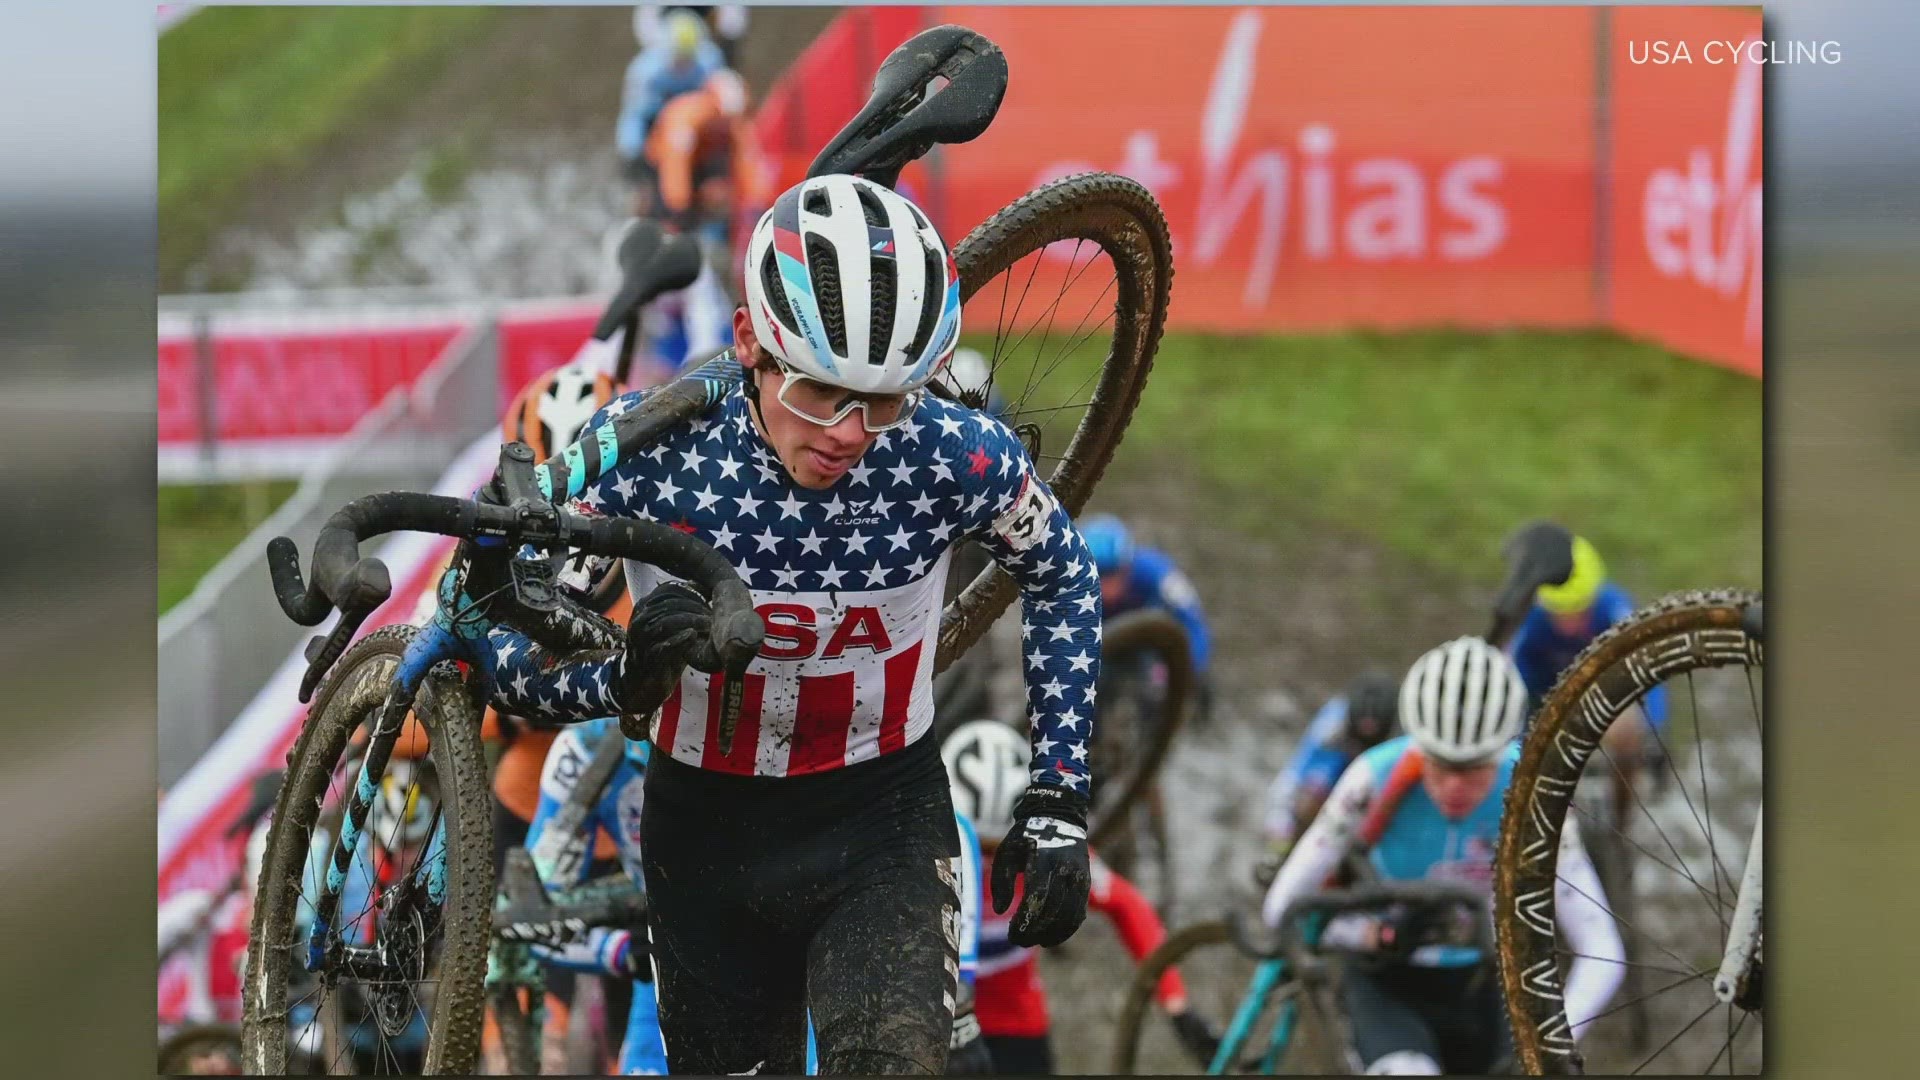 Magnus White was preparing to compete in the Junior Men’s Mountain Bike Cross-Country World Championships in Scotland.